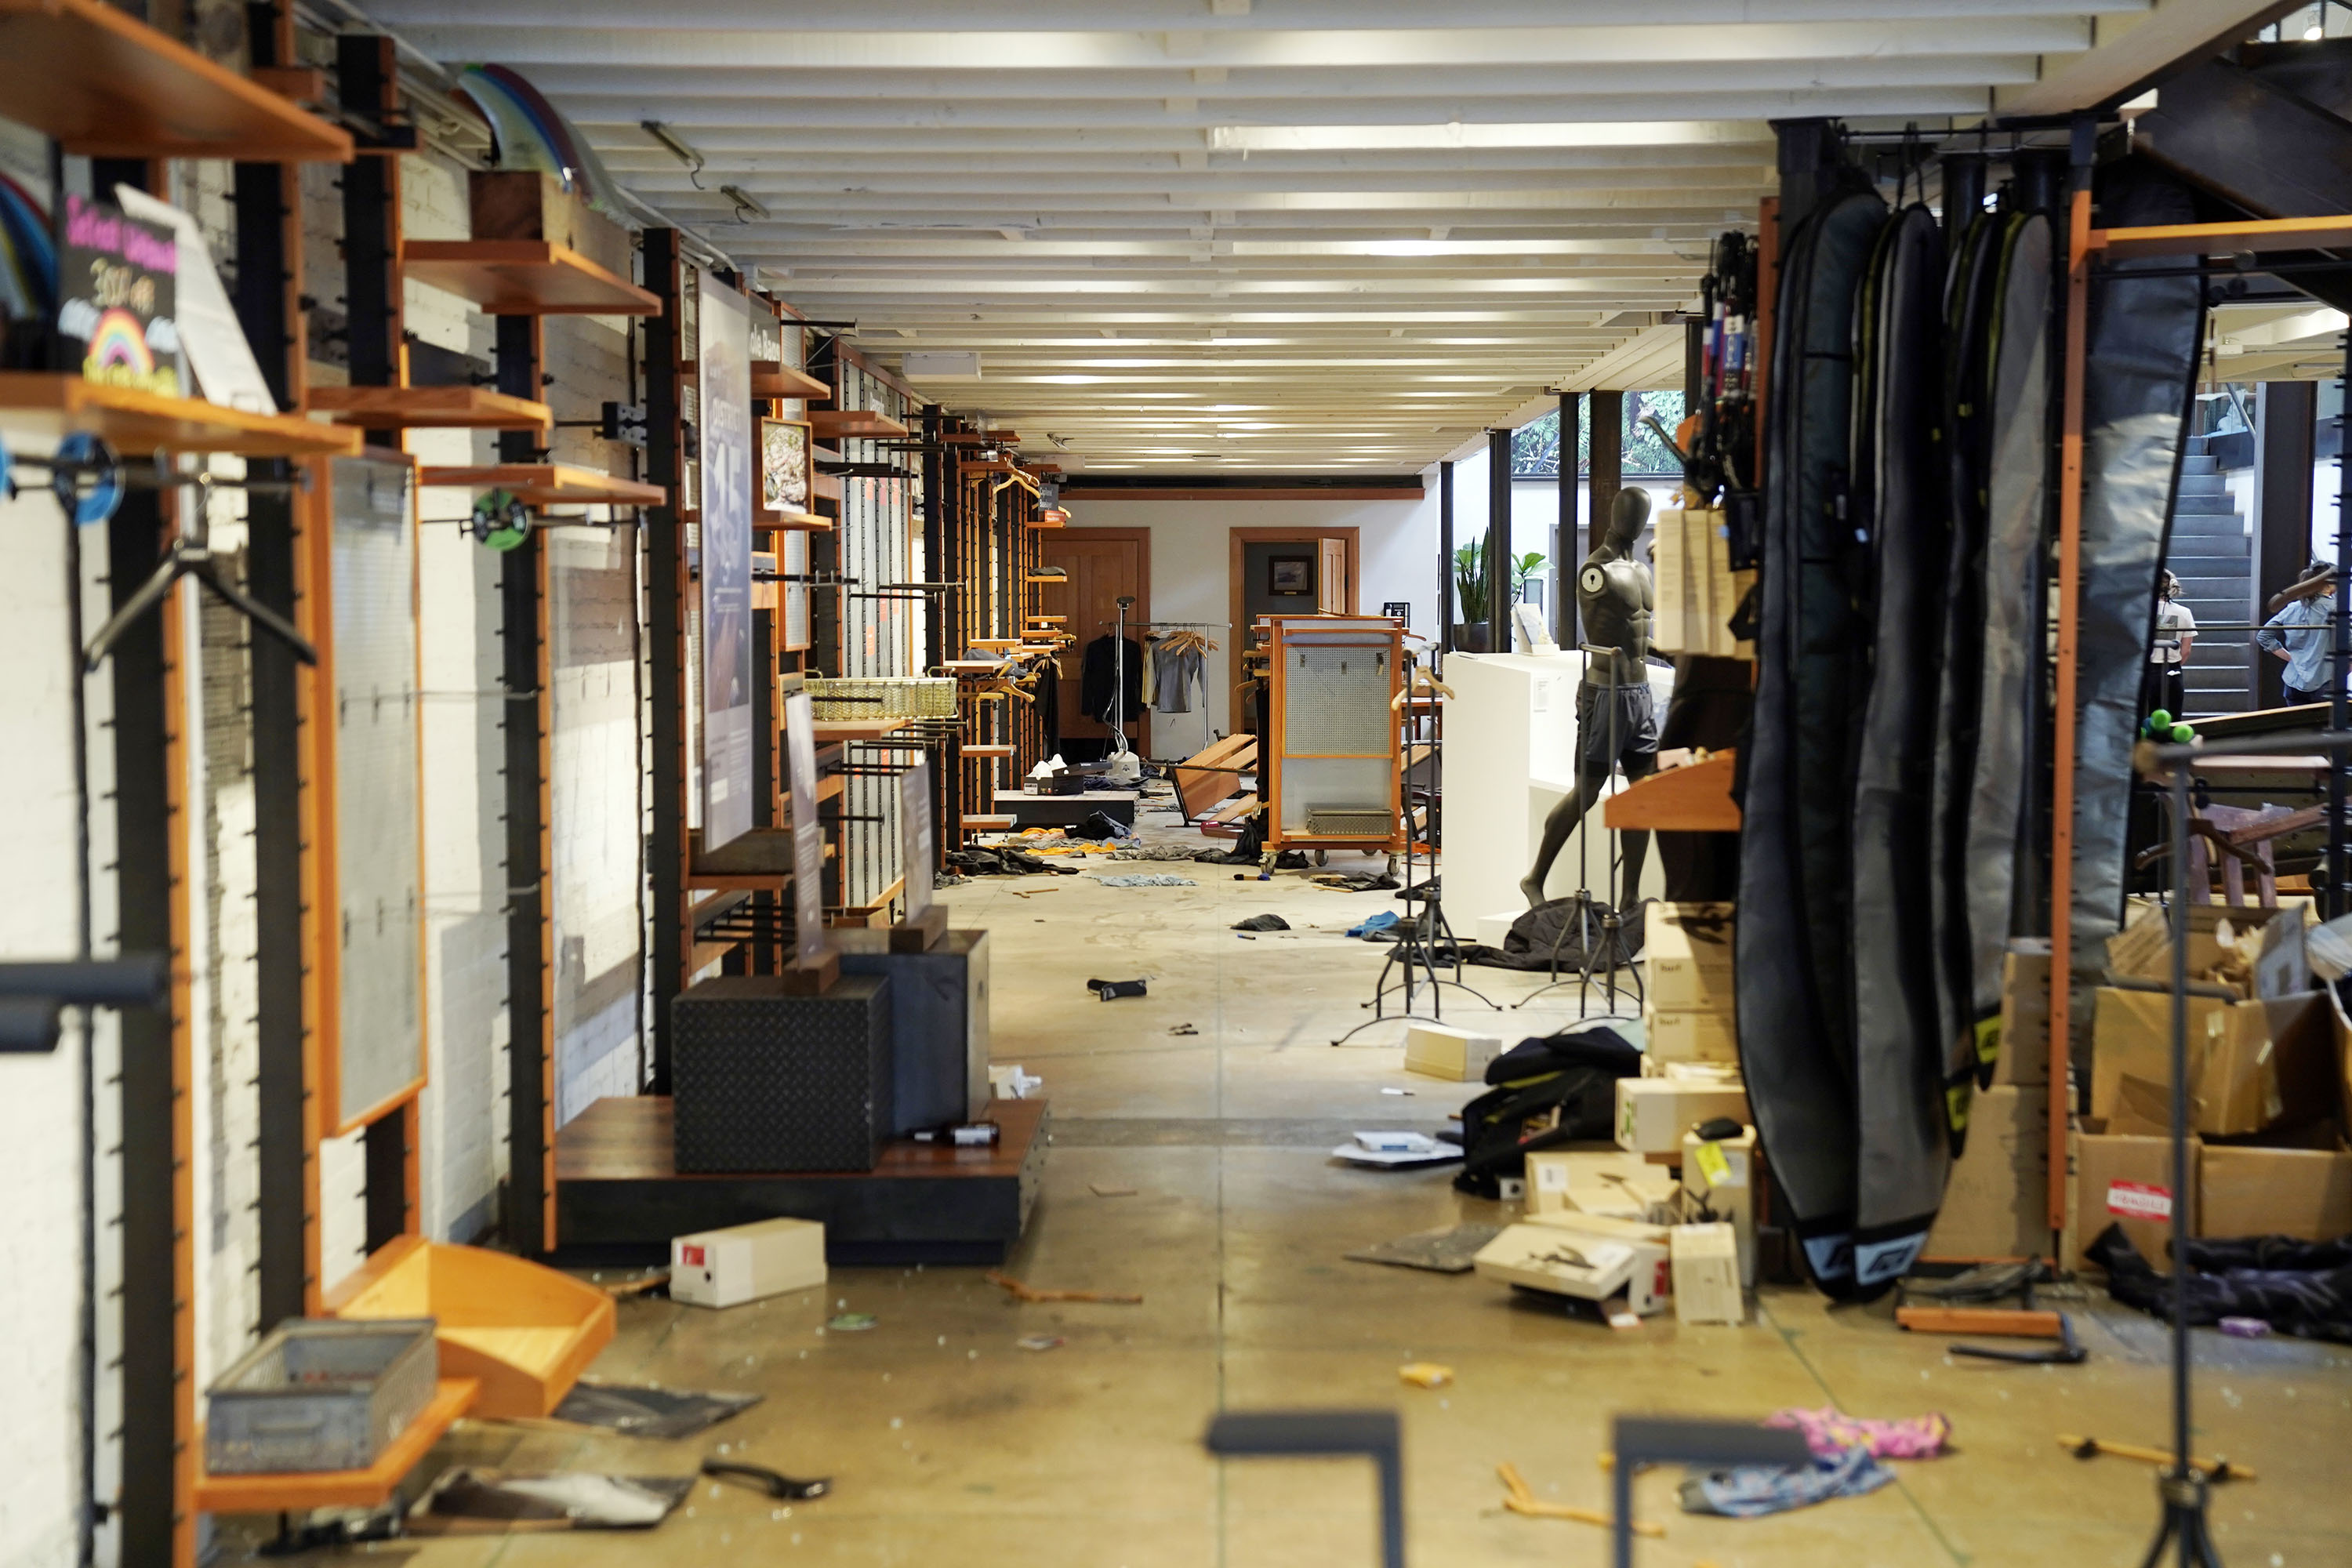 Widespread damage is seen in an outdoor clothing store after rioting and looting caused widespread damage in Santa Monica, California, on June 1. 